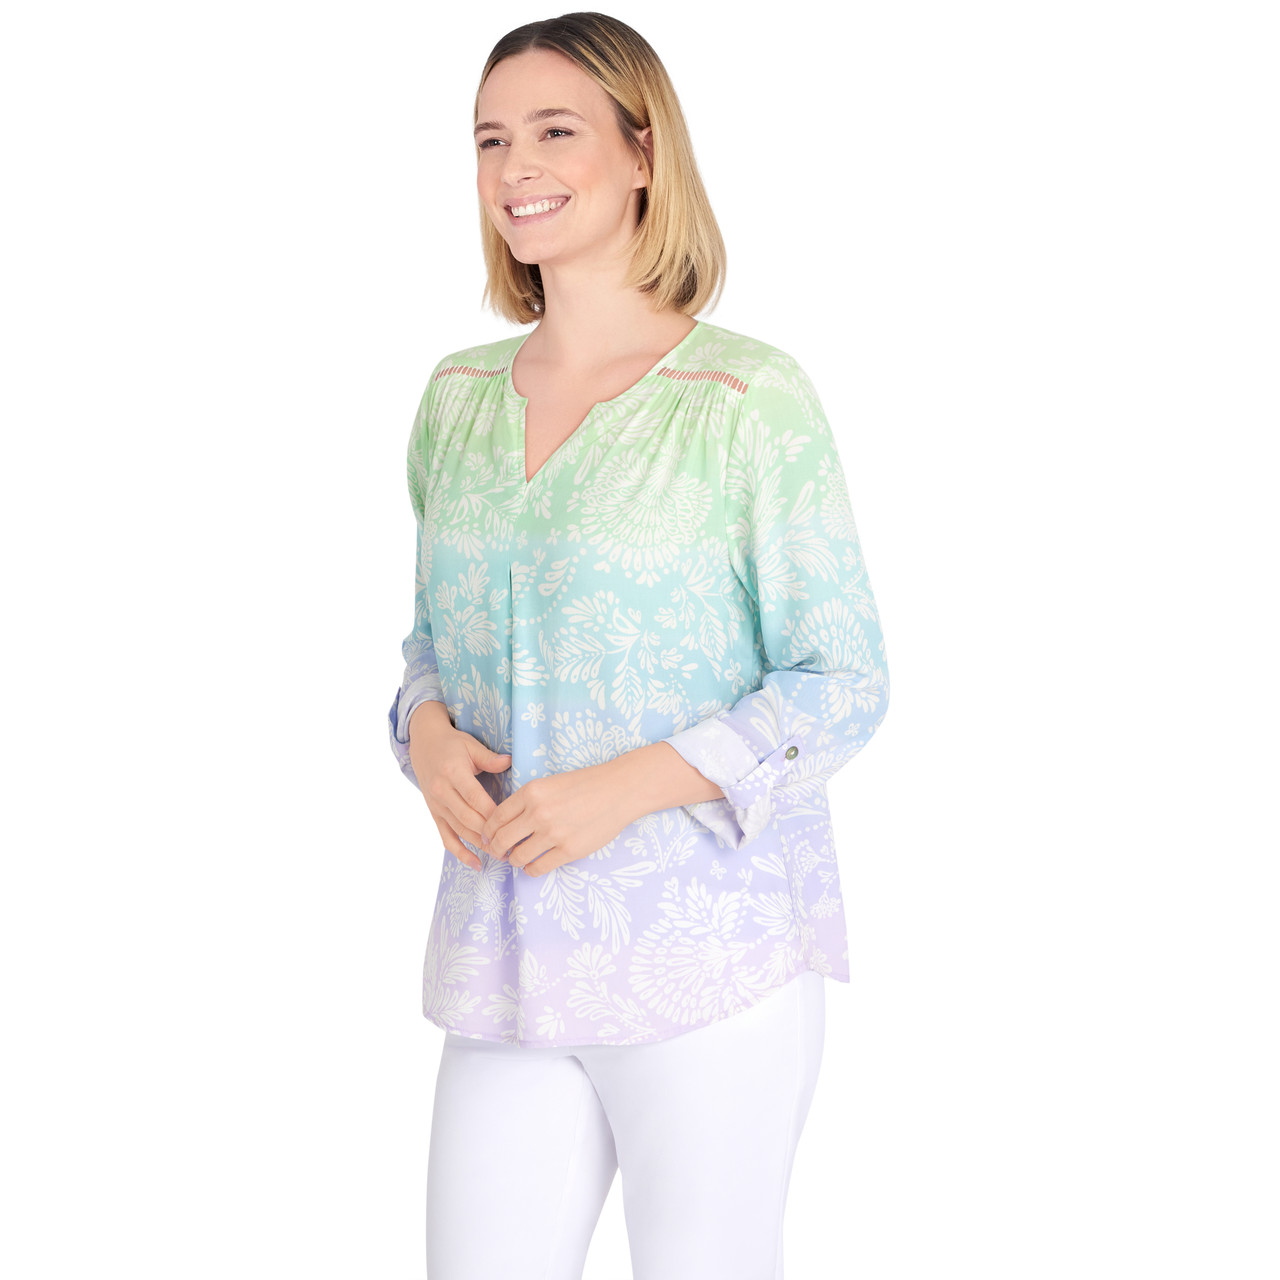 Ruby Rd. Women's Woven Ombre Silk Top Lily Multi L